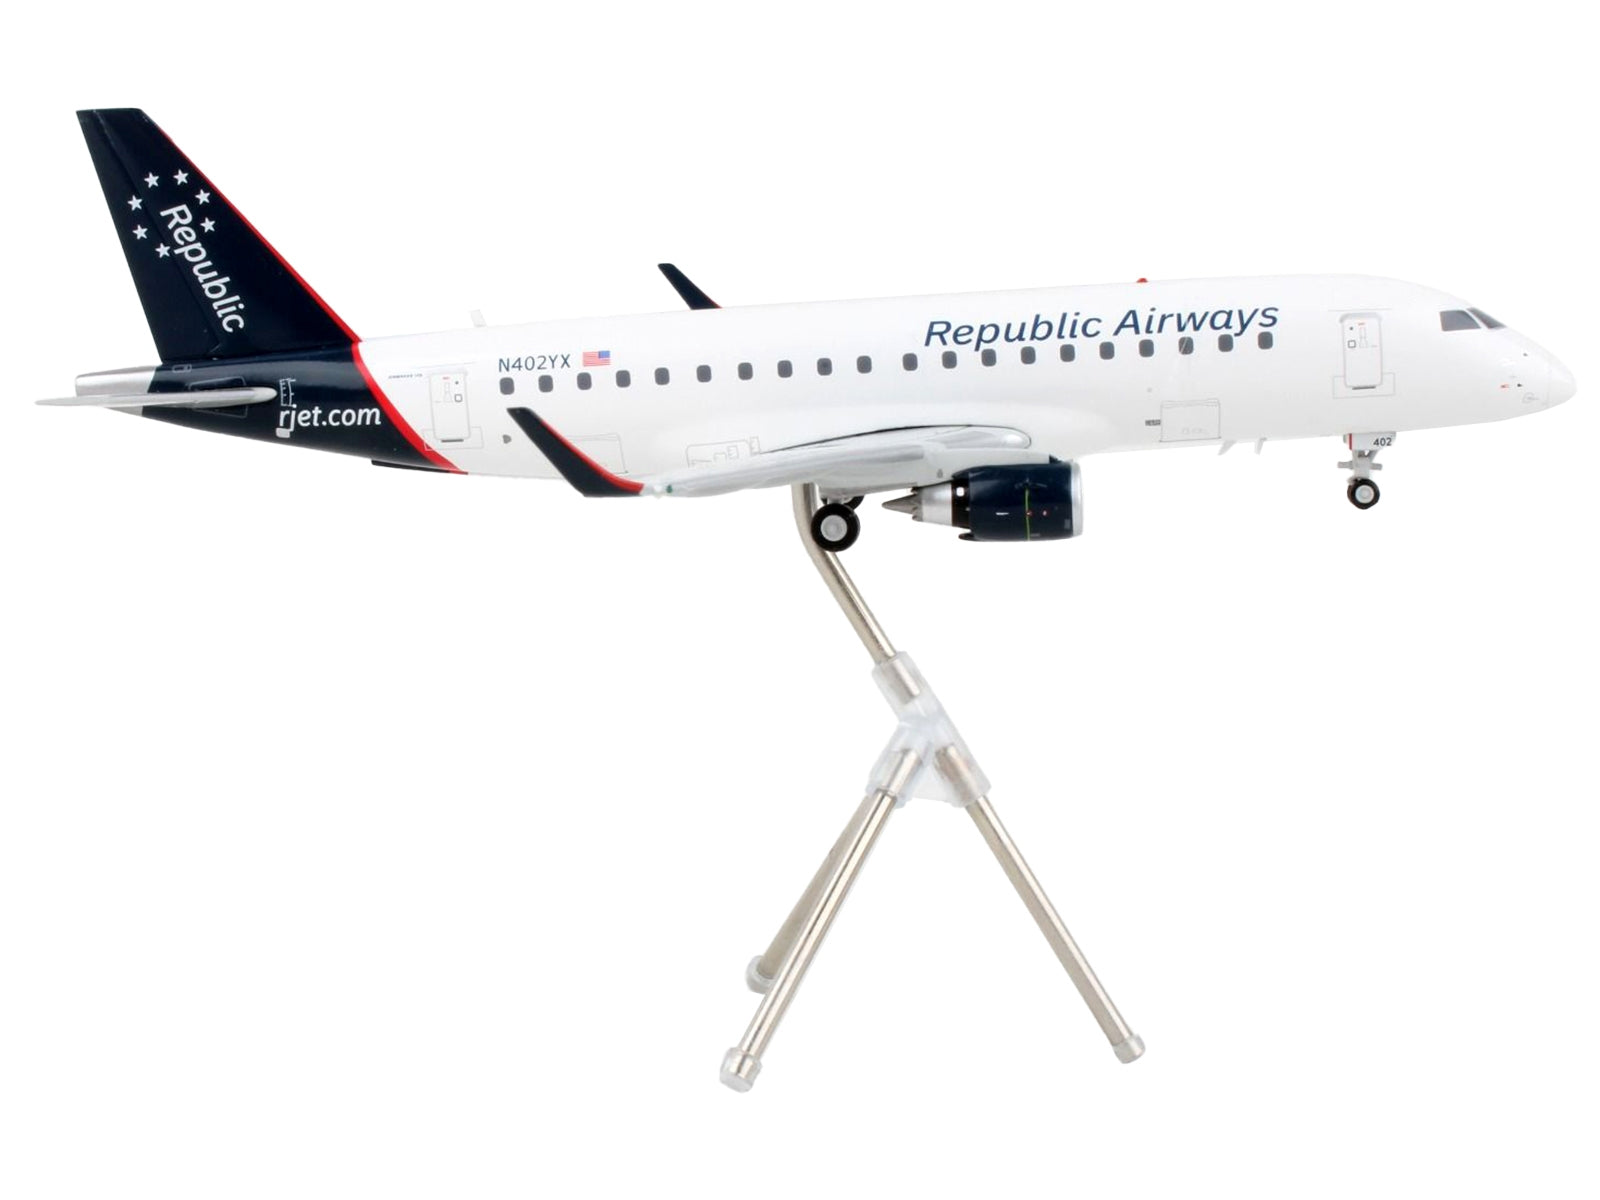 Embraer ERJ-175 Commercial Aircraft "Republic Airways" White with Blue Tail "Gemini 200" Series 1/200 Diecast Model Airplane by GeminiJets